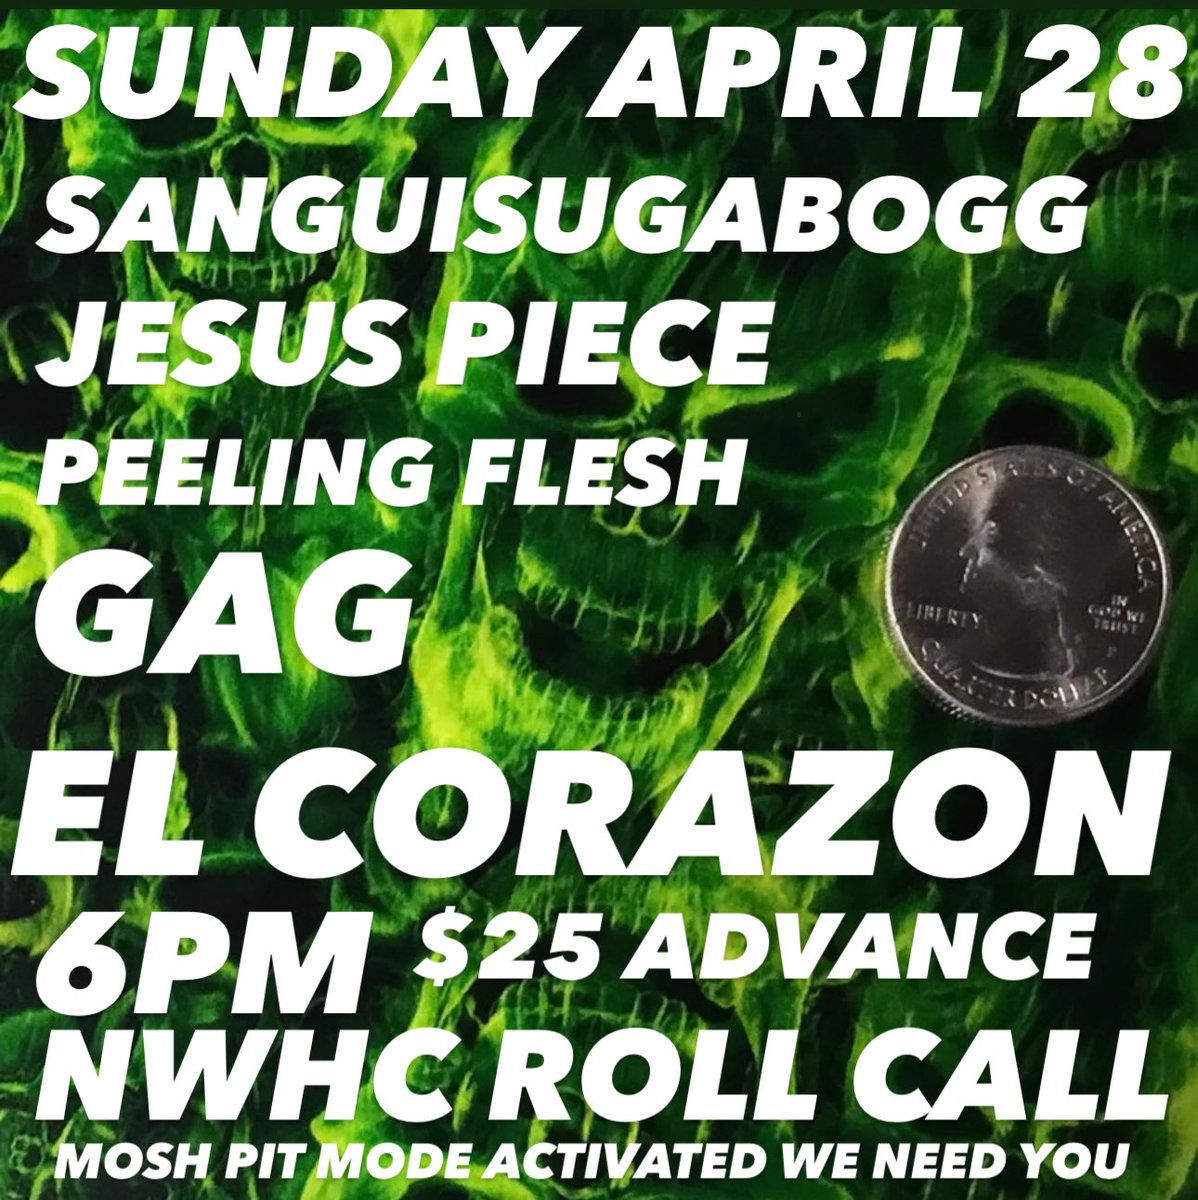 NWHC ROLL CALL MOSHERS REPRESENT YOUR HOOD 206 253 425 360 503 971 SELL THIS BITCH OUT AND CREATE AN EXTINCTION LEVEL EVENT MOSH PIT @sanguisugabogg @JesusPieceHC @peelingfleshok @Gagguysnw TICKETS: wl.seetickets.us/event/sanguisu…